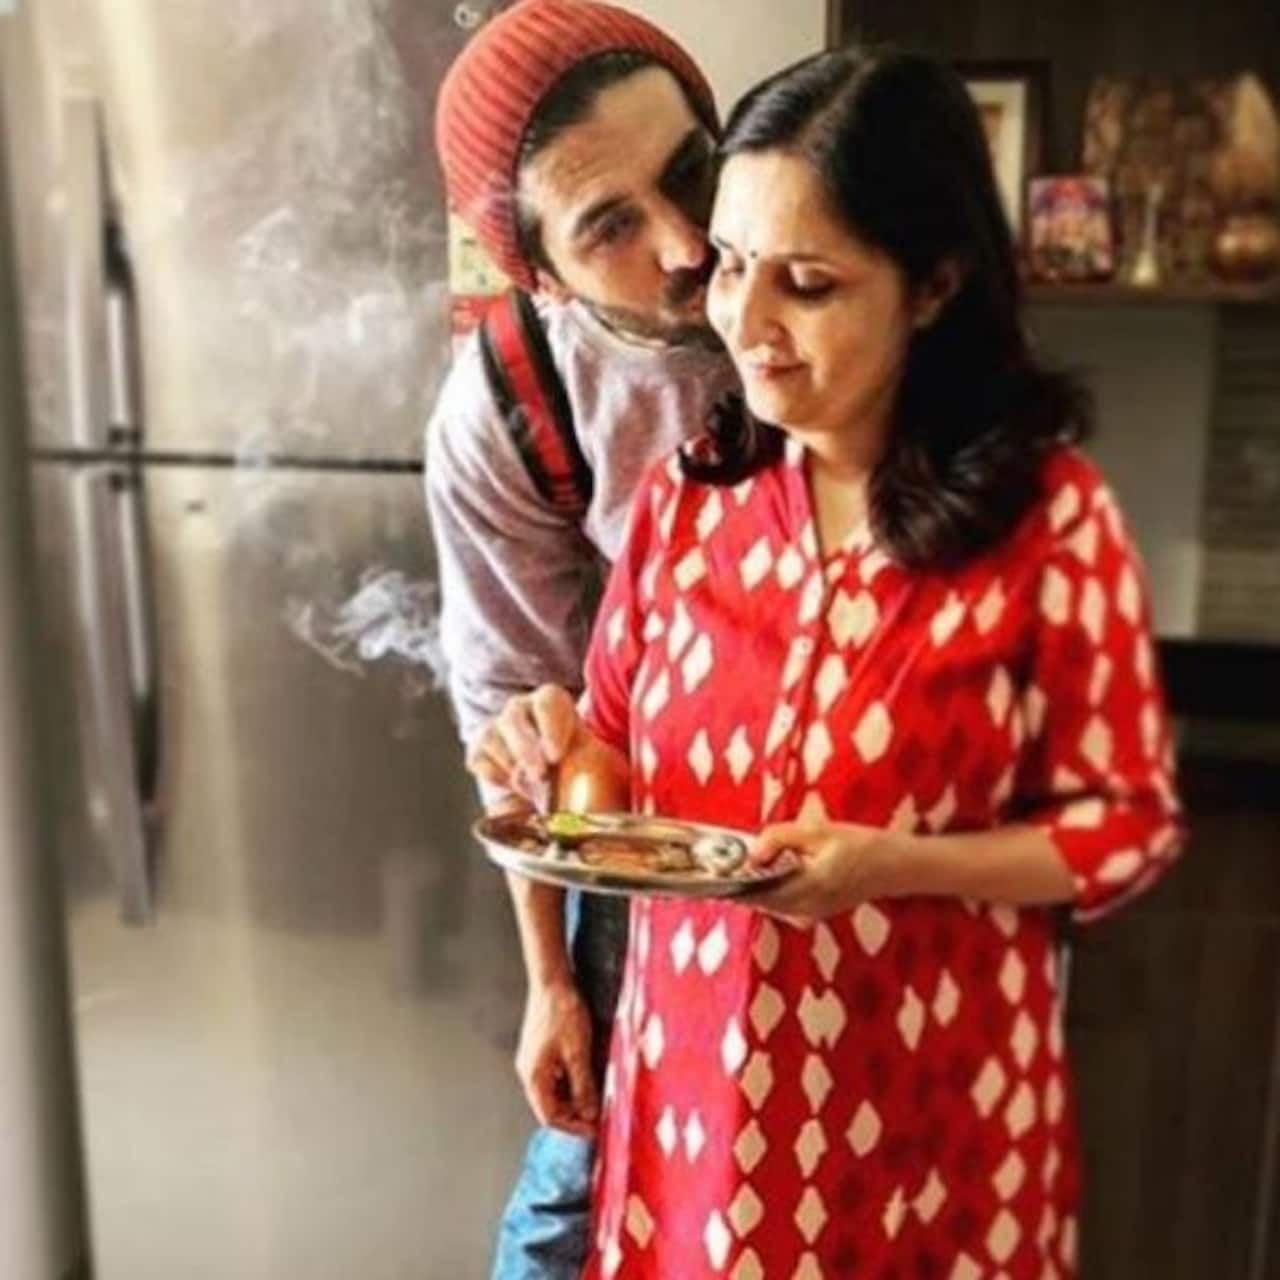 Kartik Aaryan gets teary-eyed as he recalls his mother's battle with breast cancer: 'It was a very emotional time for all of us'